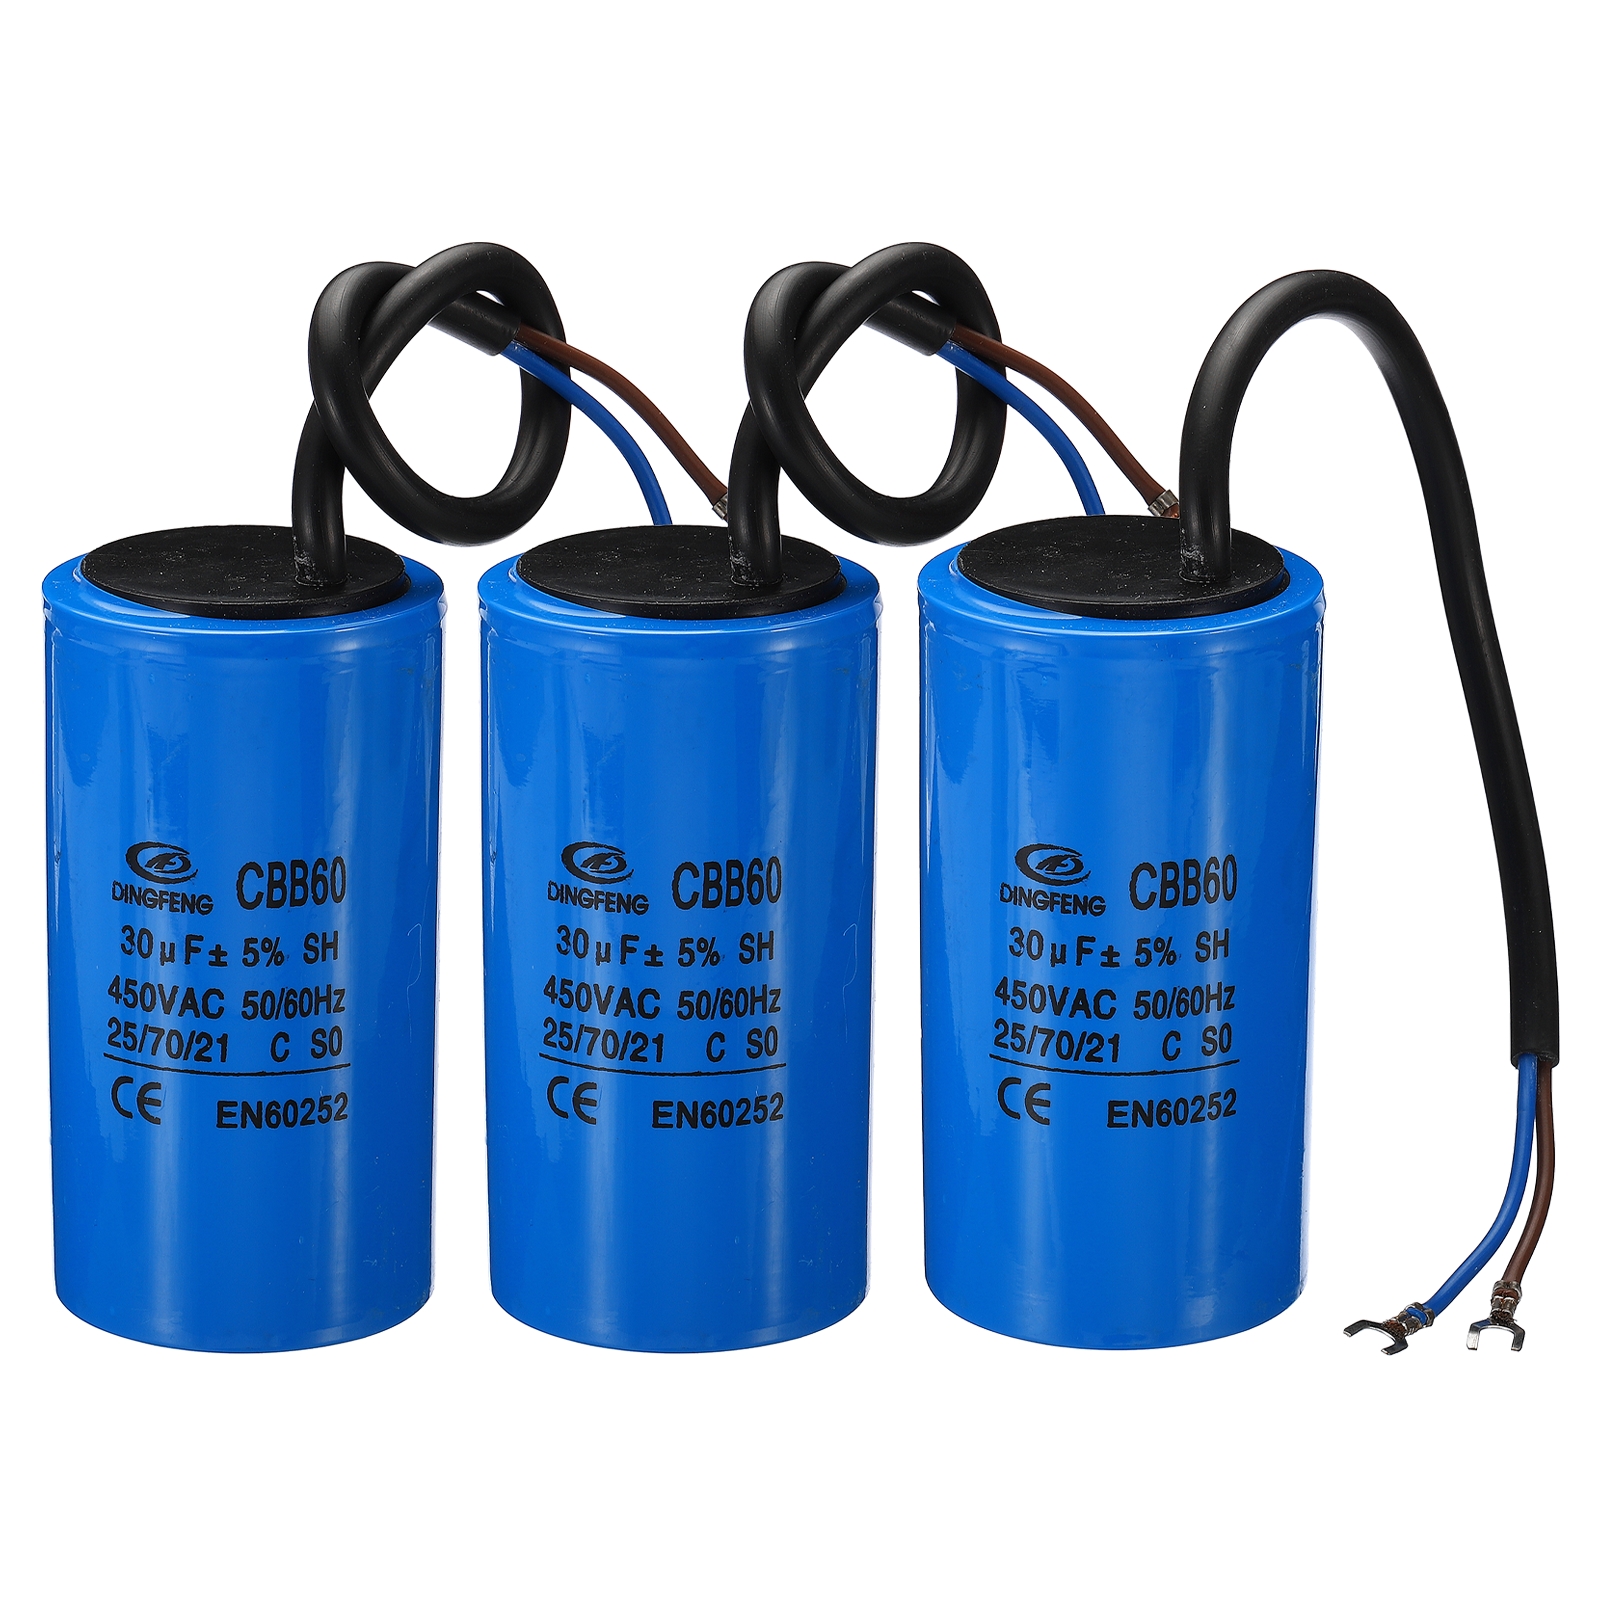 CBB60 30uF Running Capacitor, 3pcs AC 450V 2 Wires 50/60Hz Cylinder 90x50mm for Motor Start - image 1 of 5